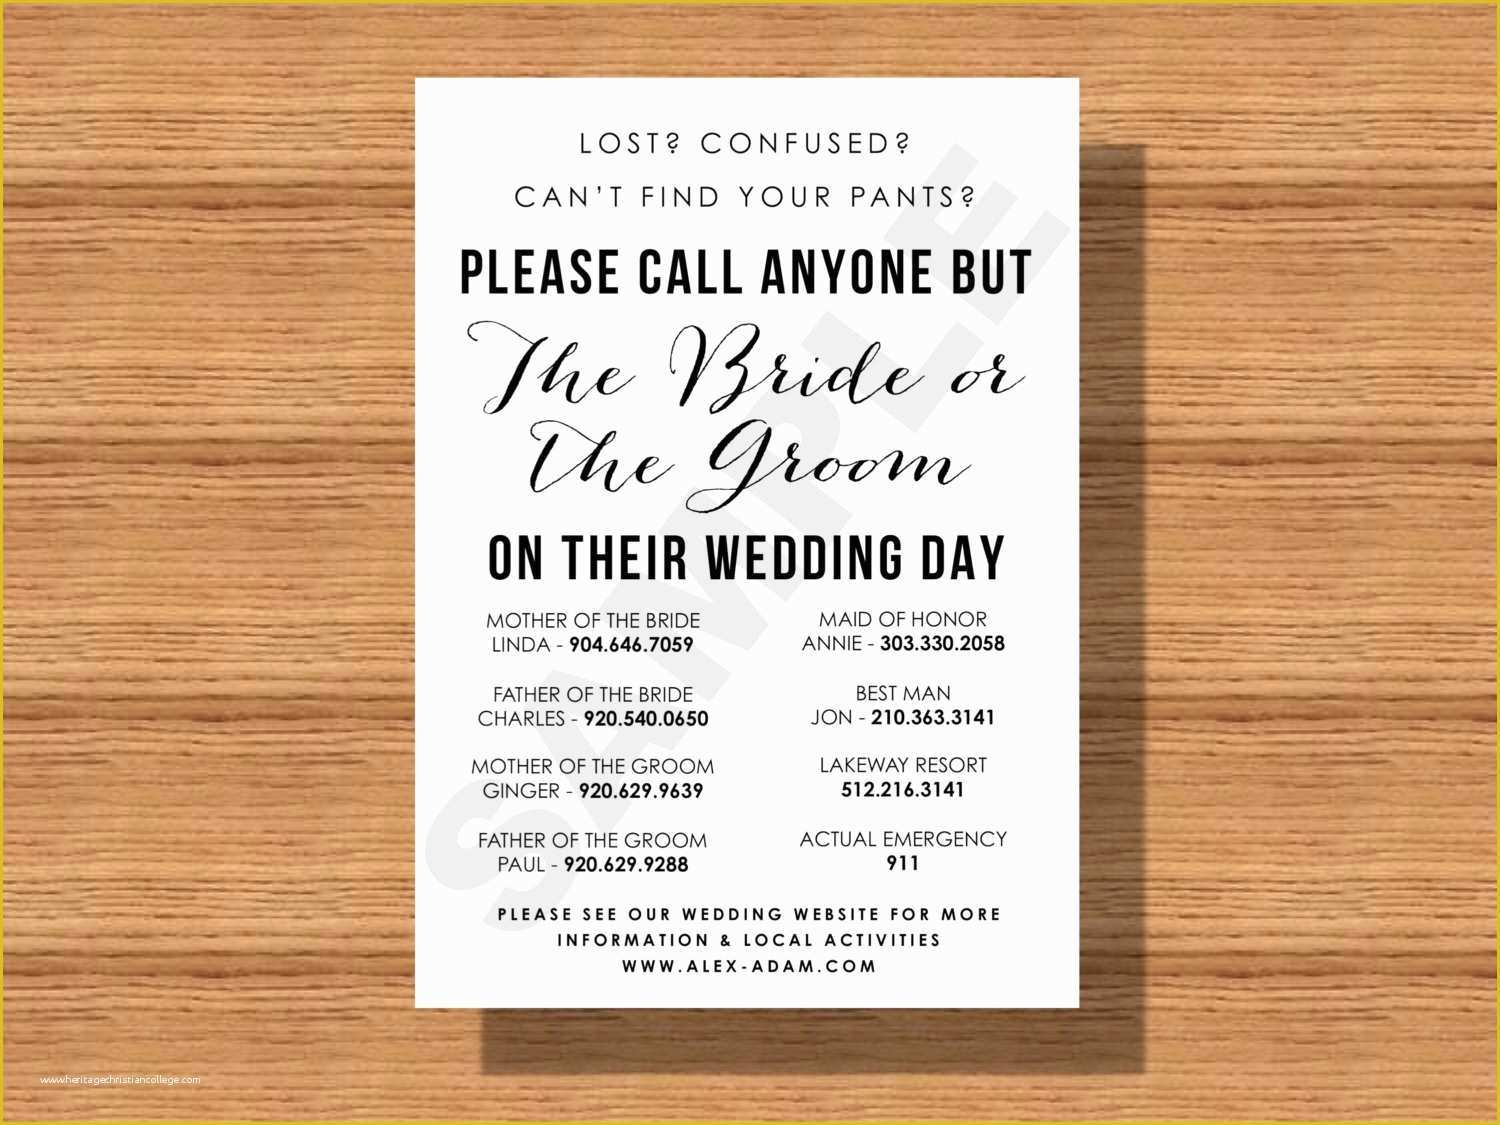 Call Anyone but the Bride Free Template Of Wedding Day Contact Sheet Please Call Anyone but the Bride or